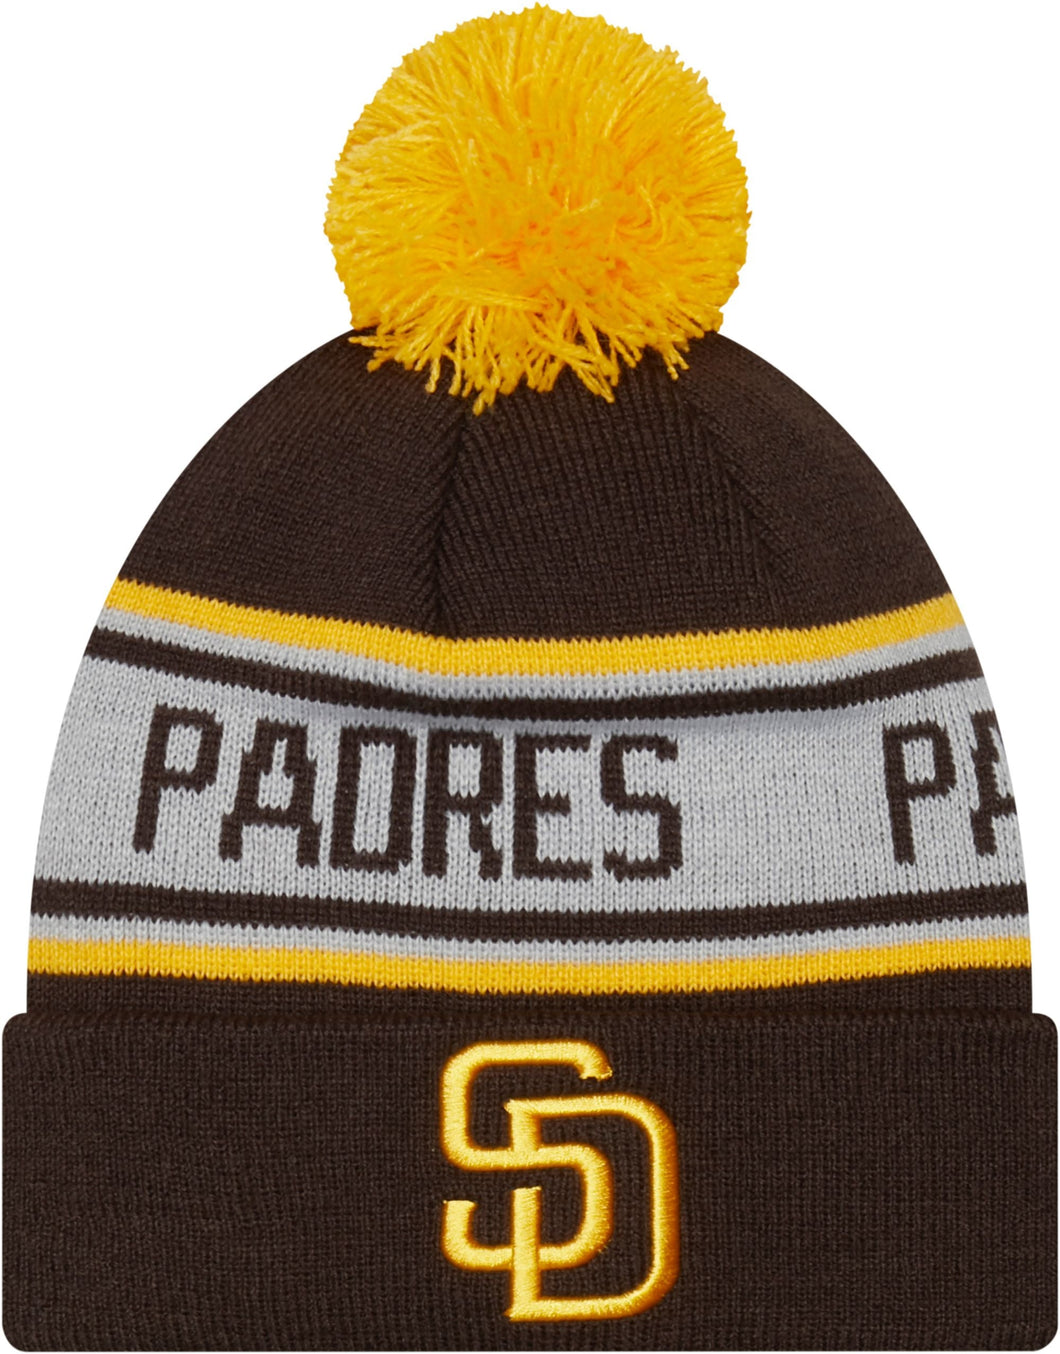 (Youth) San Diego Padres New Era MLB Cuffed Pom Knit Hat Brown/White Crown Yellow Team Color Logo (Repeat)